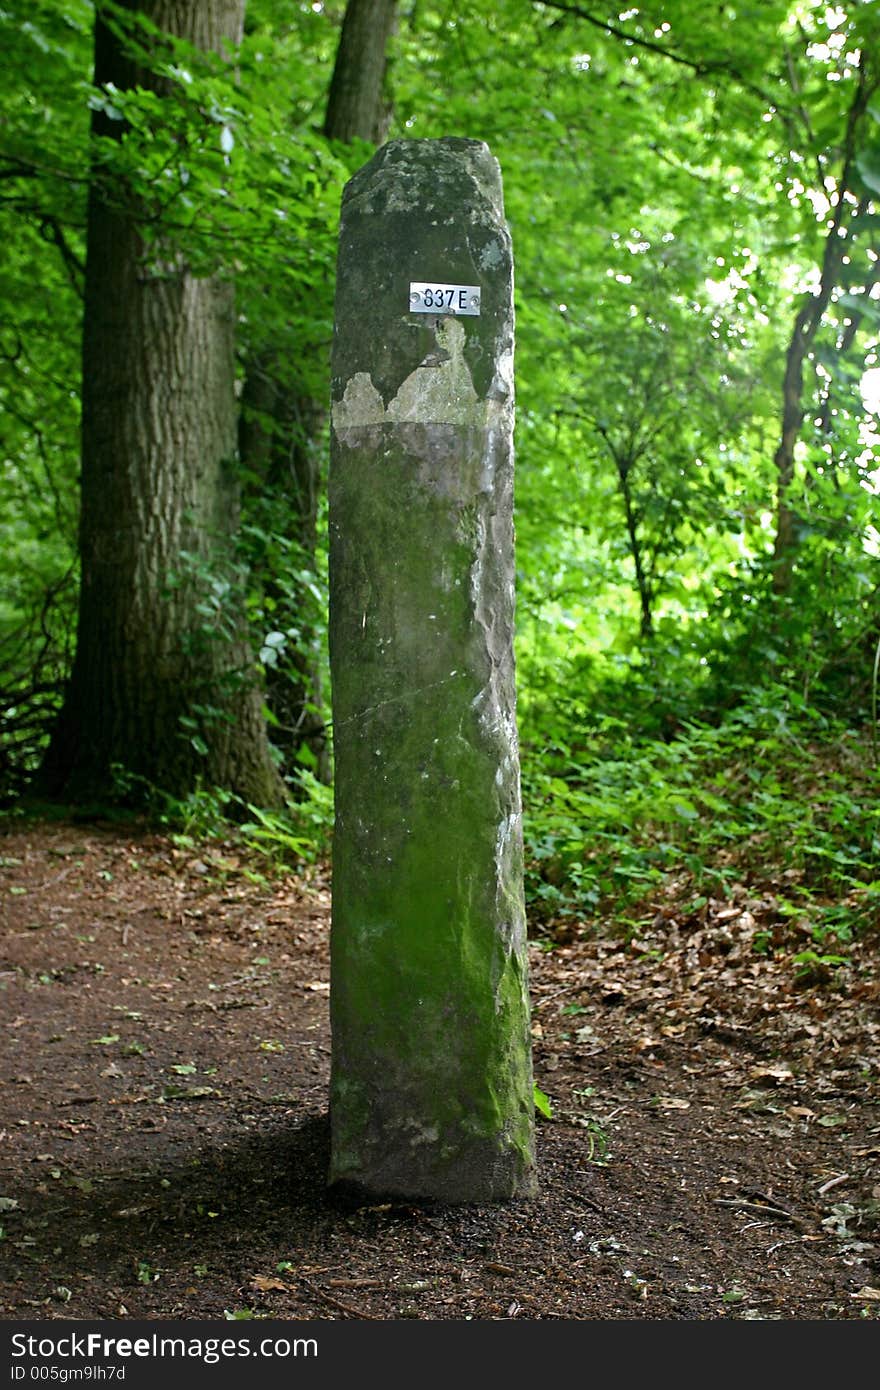 Stone border marker at the border between Germany and the Netherlands.